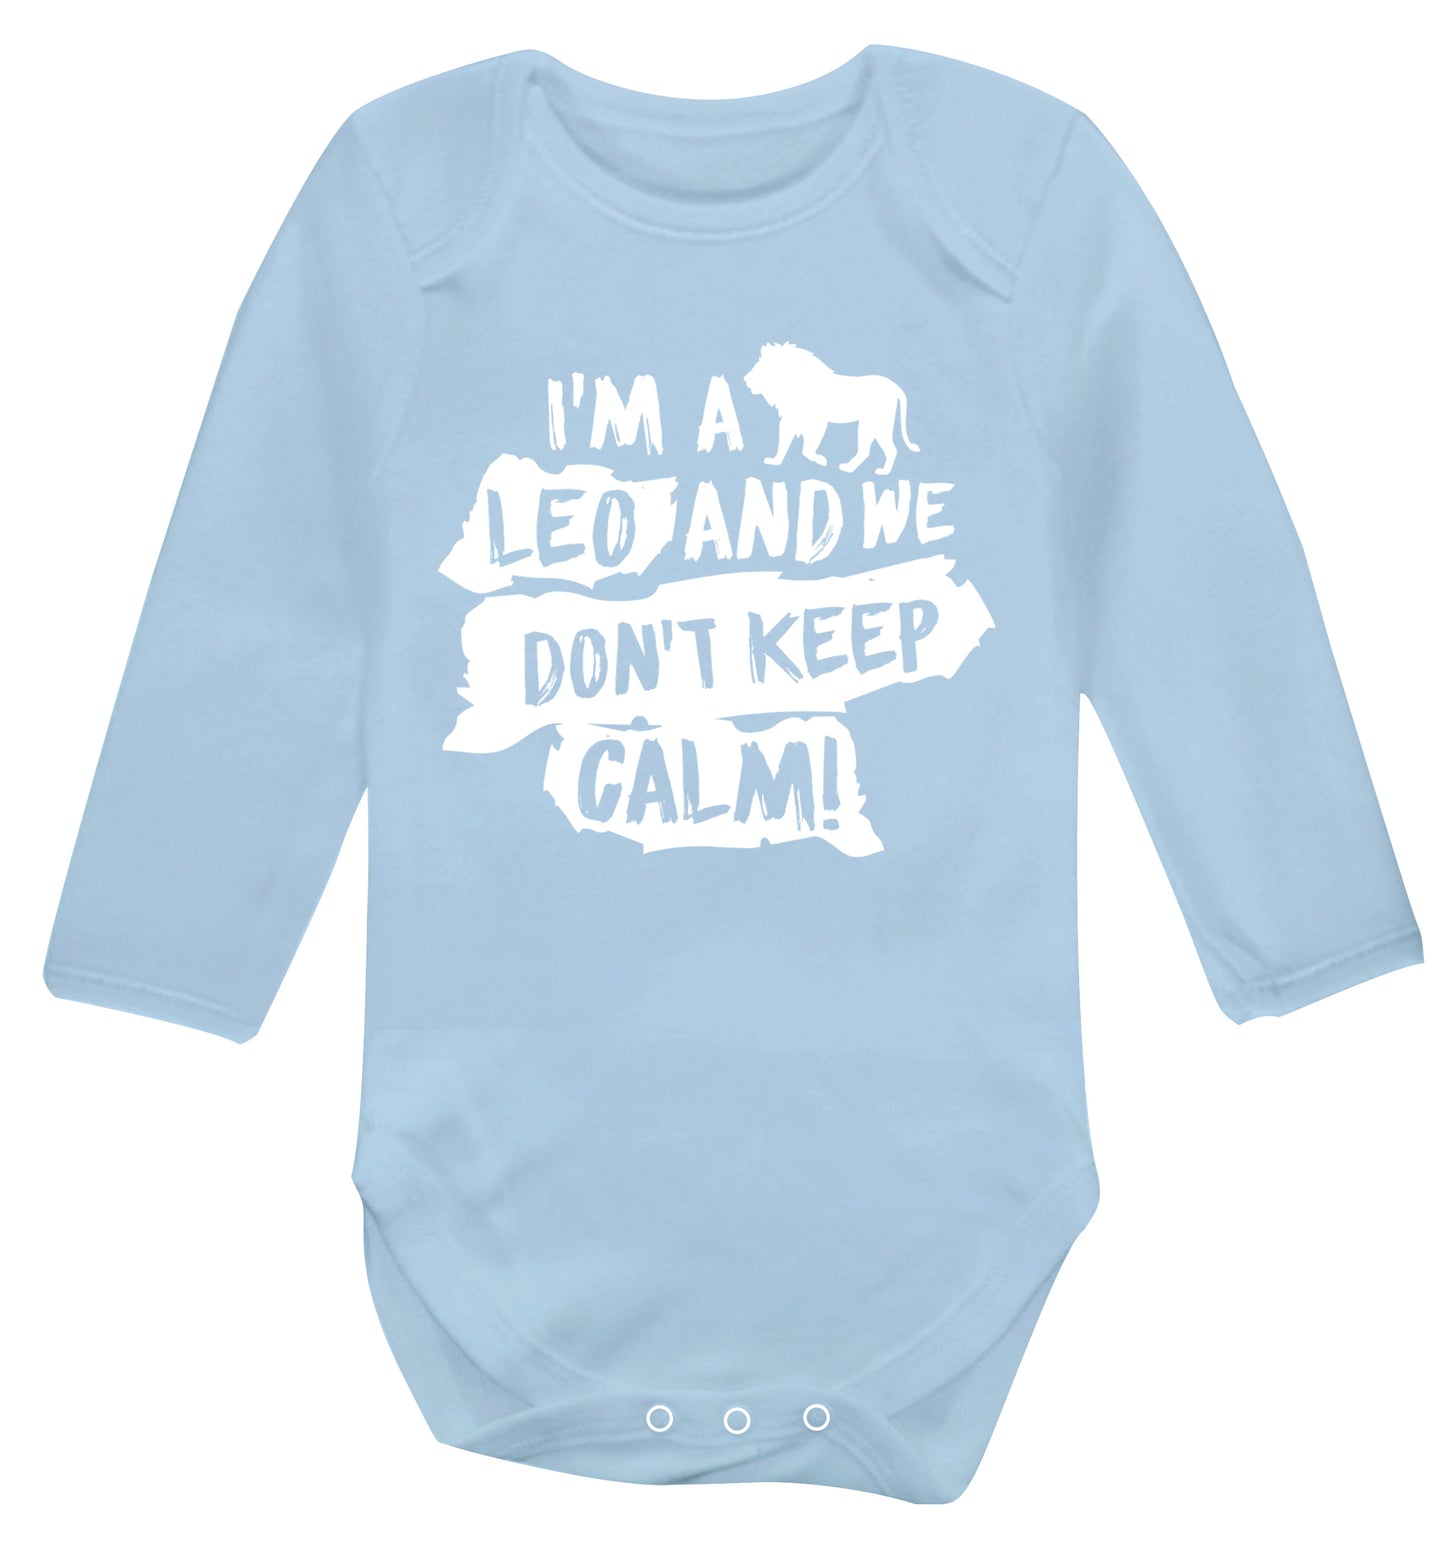 I'm a leo and we don't keep calm! Baby Vest long sleeved pale blue 6-12 months